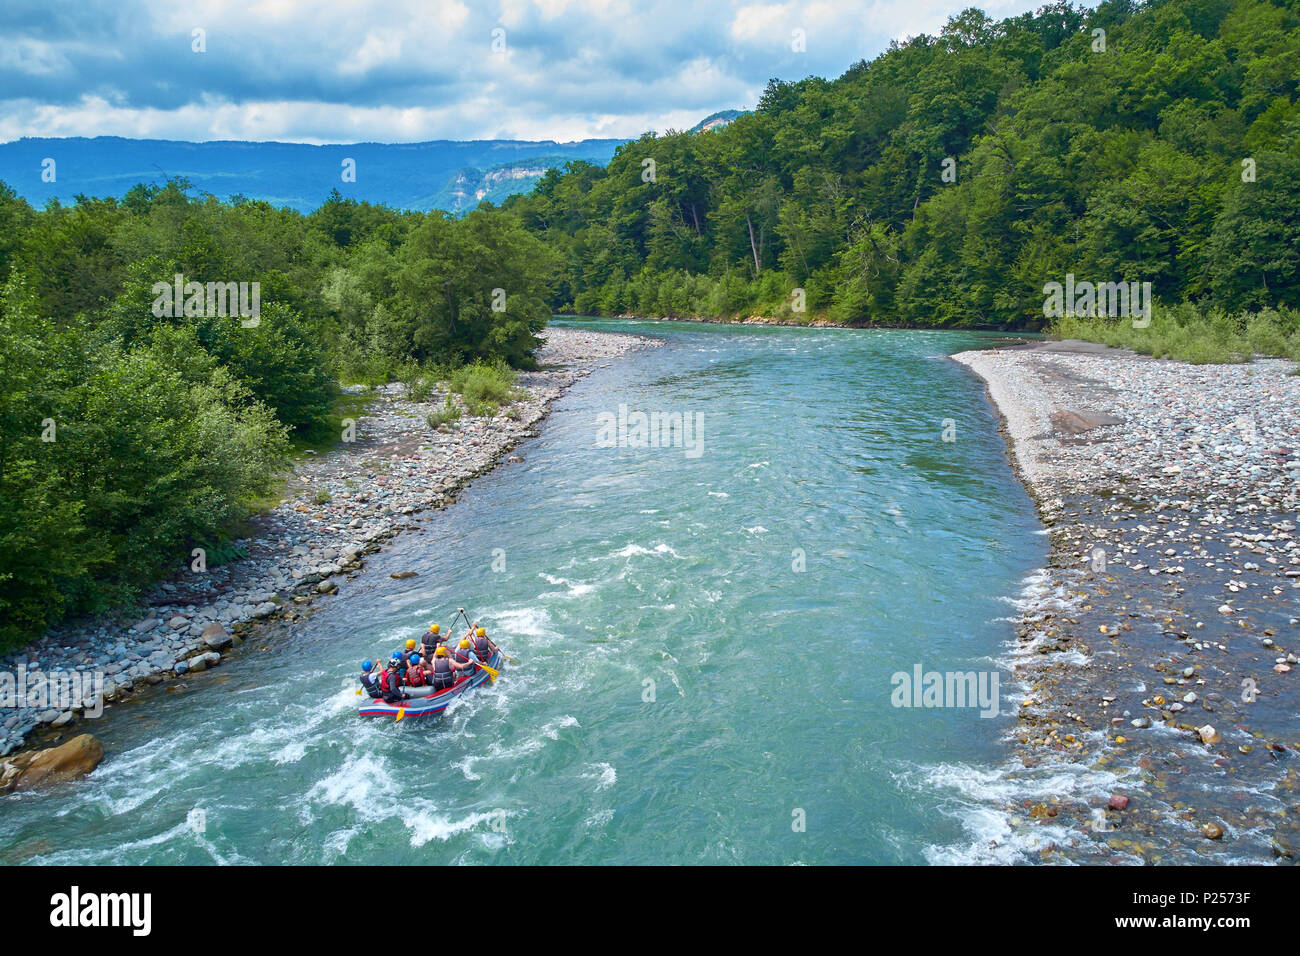 rafting on a mountain river Stock Photo